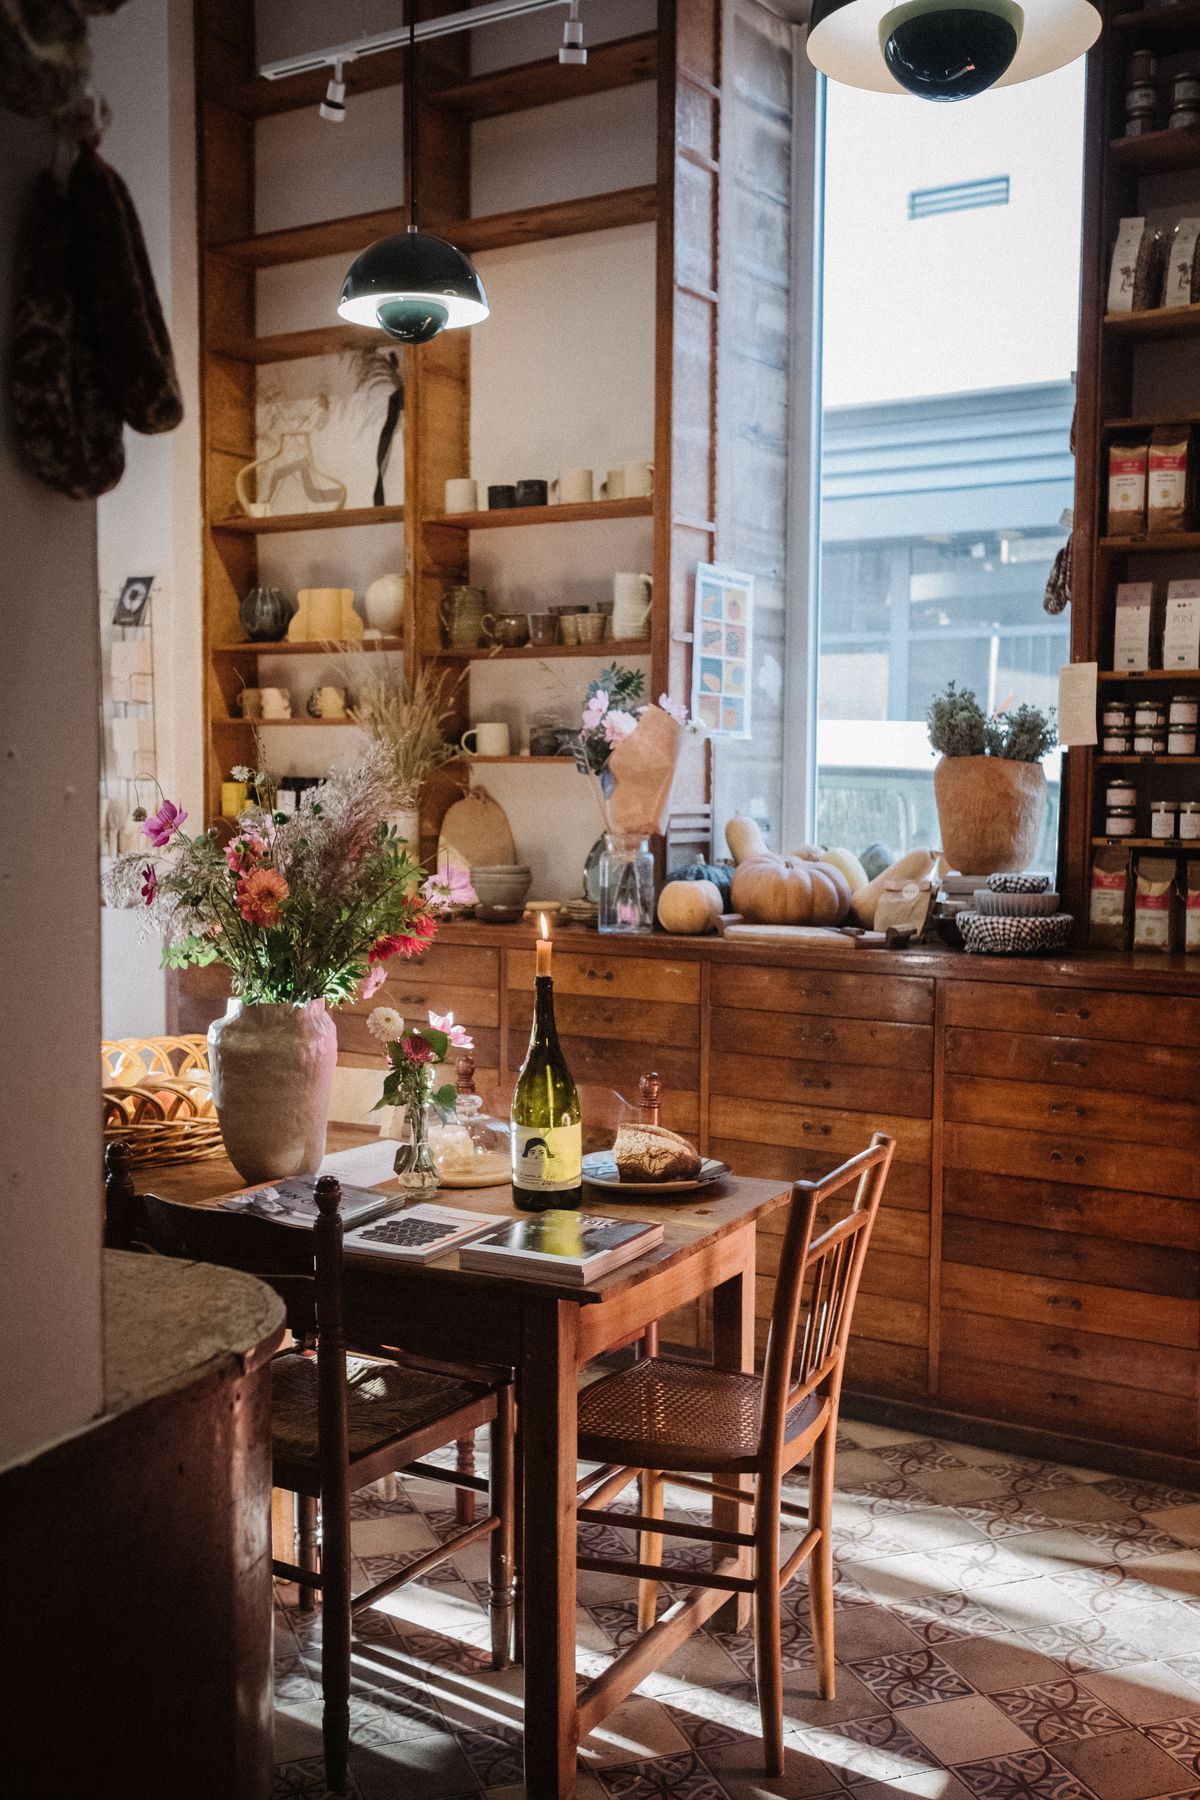 A candle burns in an empty wine bottle, sitting on a table beside a pot of flowers and food books. Beyond is a sun-lit interior, with shelves of other items and dark wood drawers.